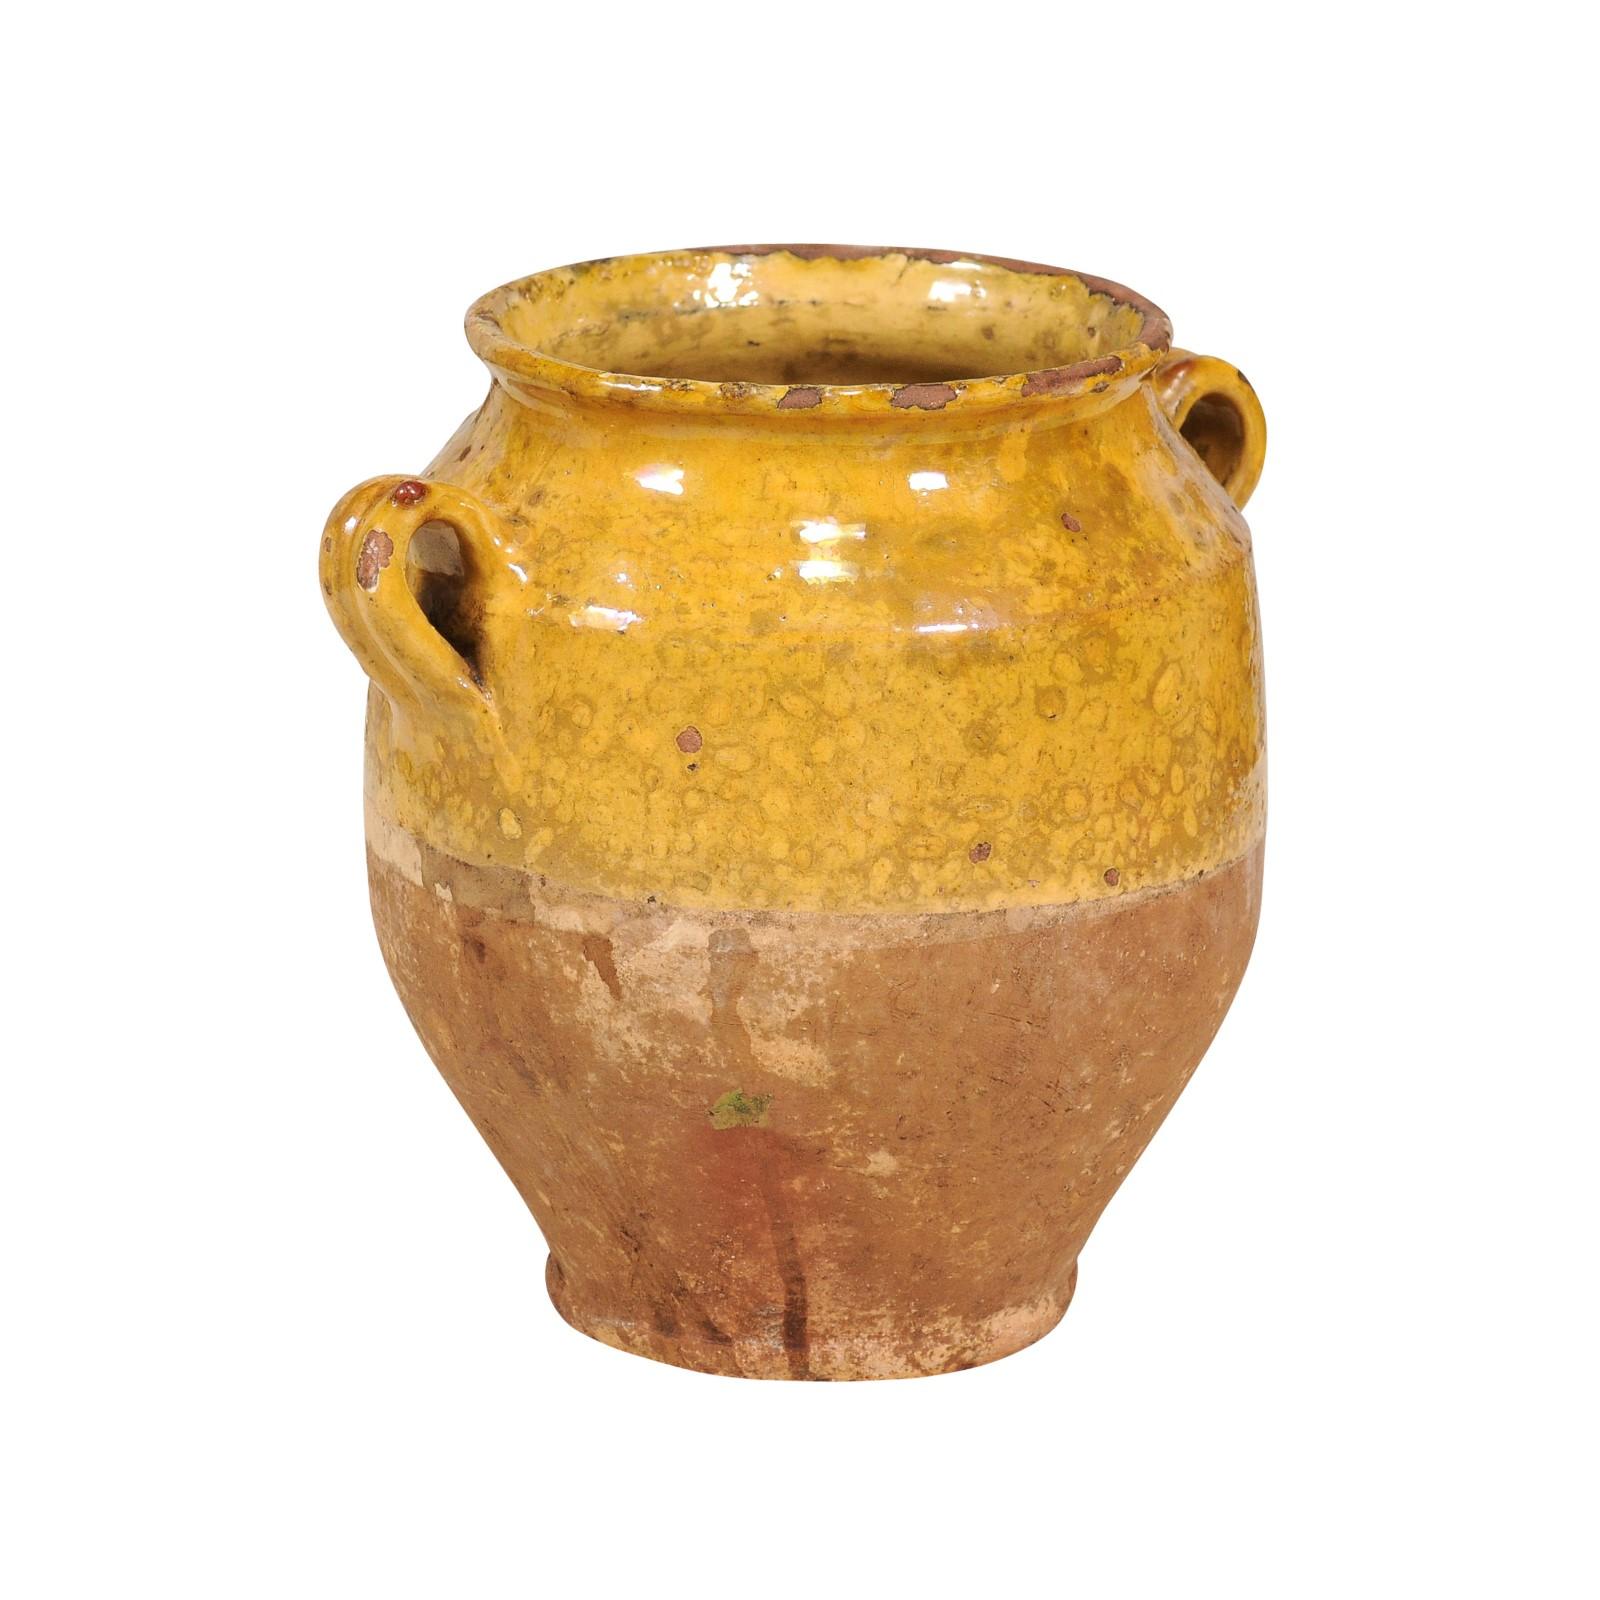 A rustic French Provincial pot à confit from the 19th century with yellow glaze and double handles. Immerse yourself in the rustic allure of this 19th-century French Provincial pot à confit, a piece that embodies the essence of rural French charm.